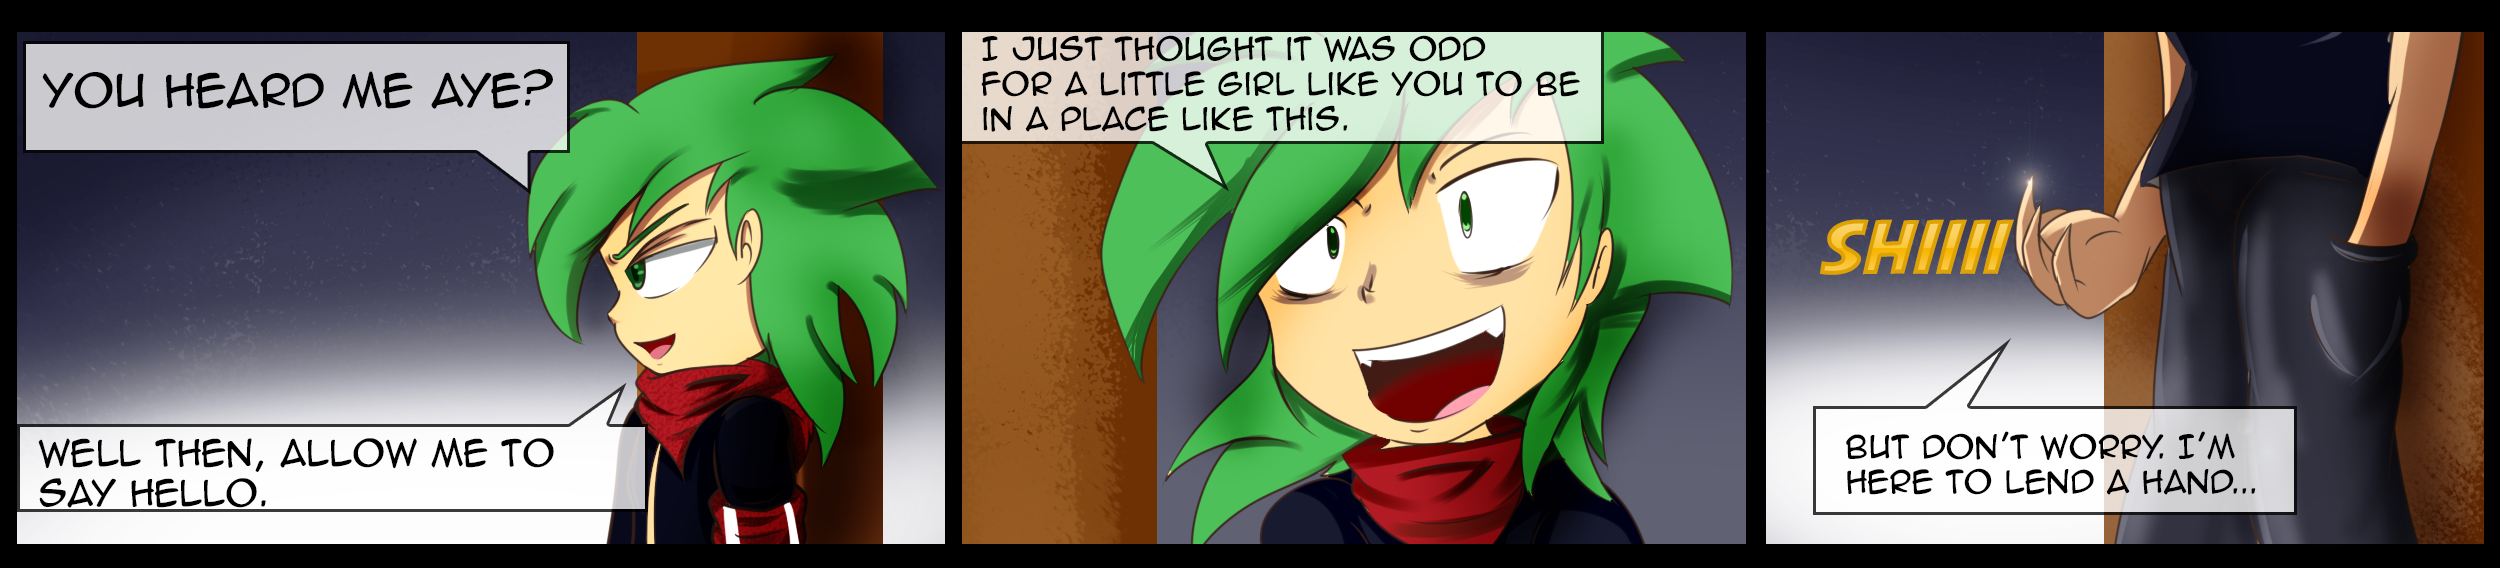 Comic strip of girl in red cloak meeting boy with angular green hair in dark clothes.